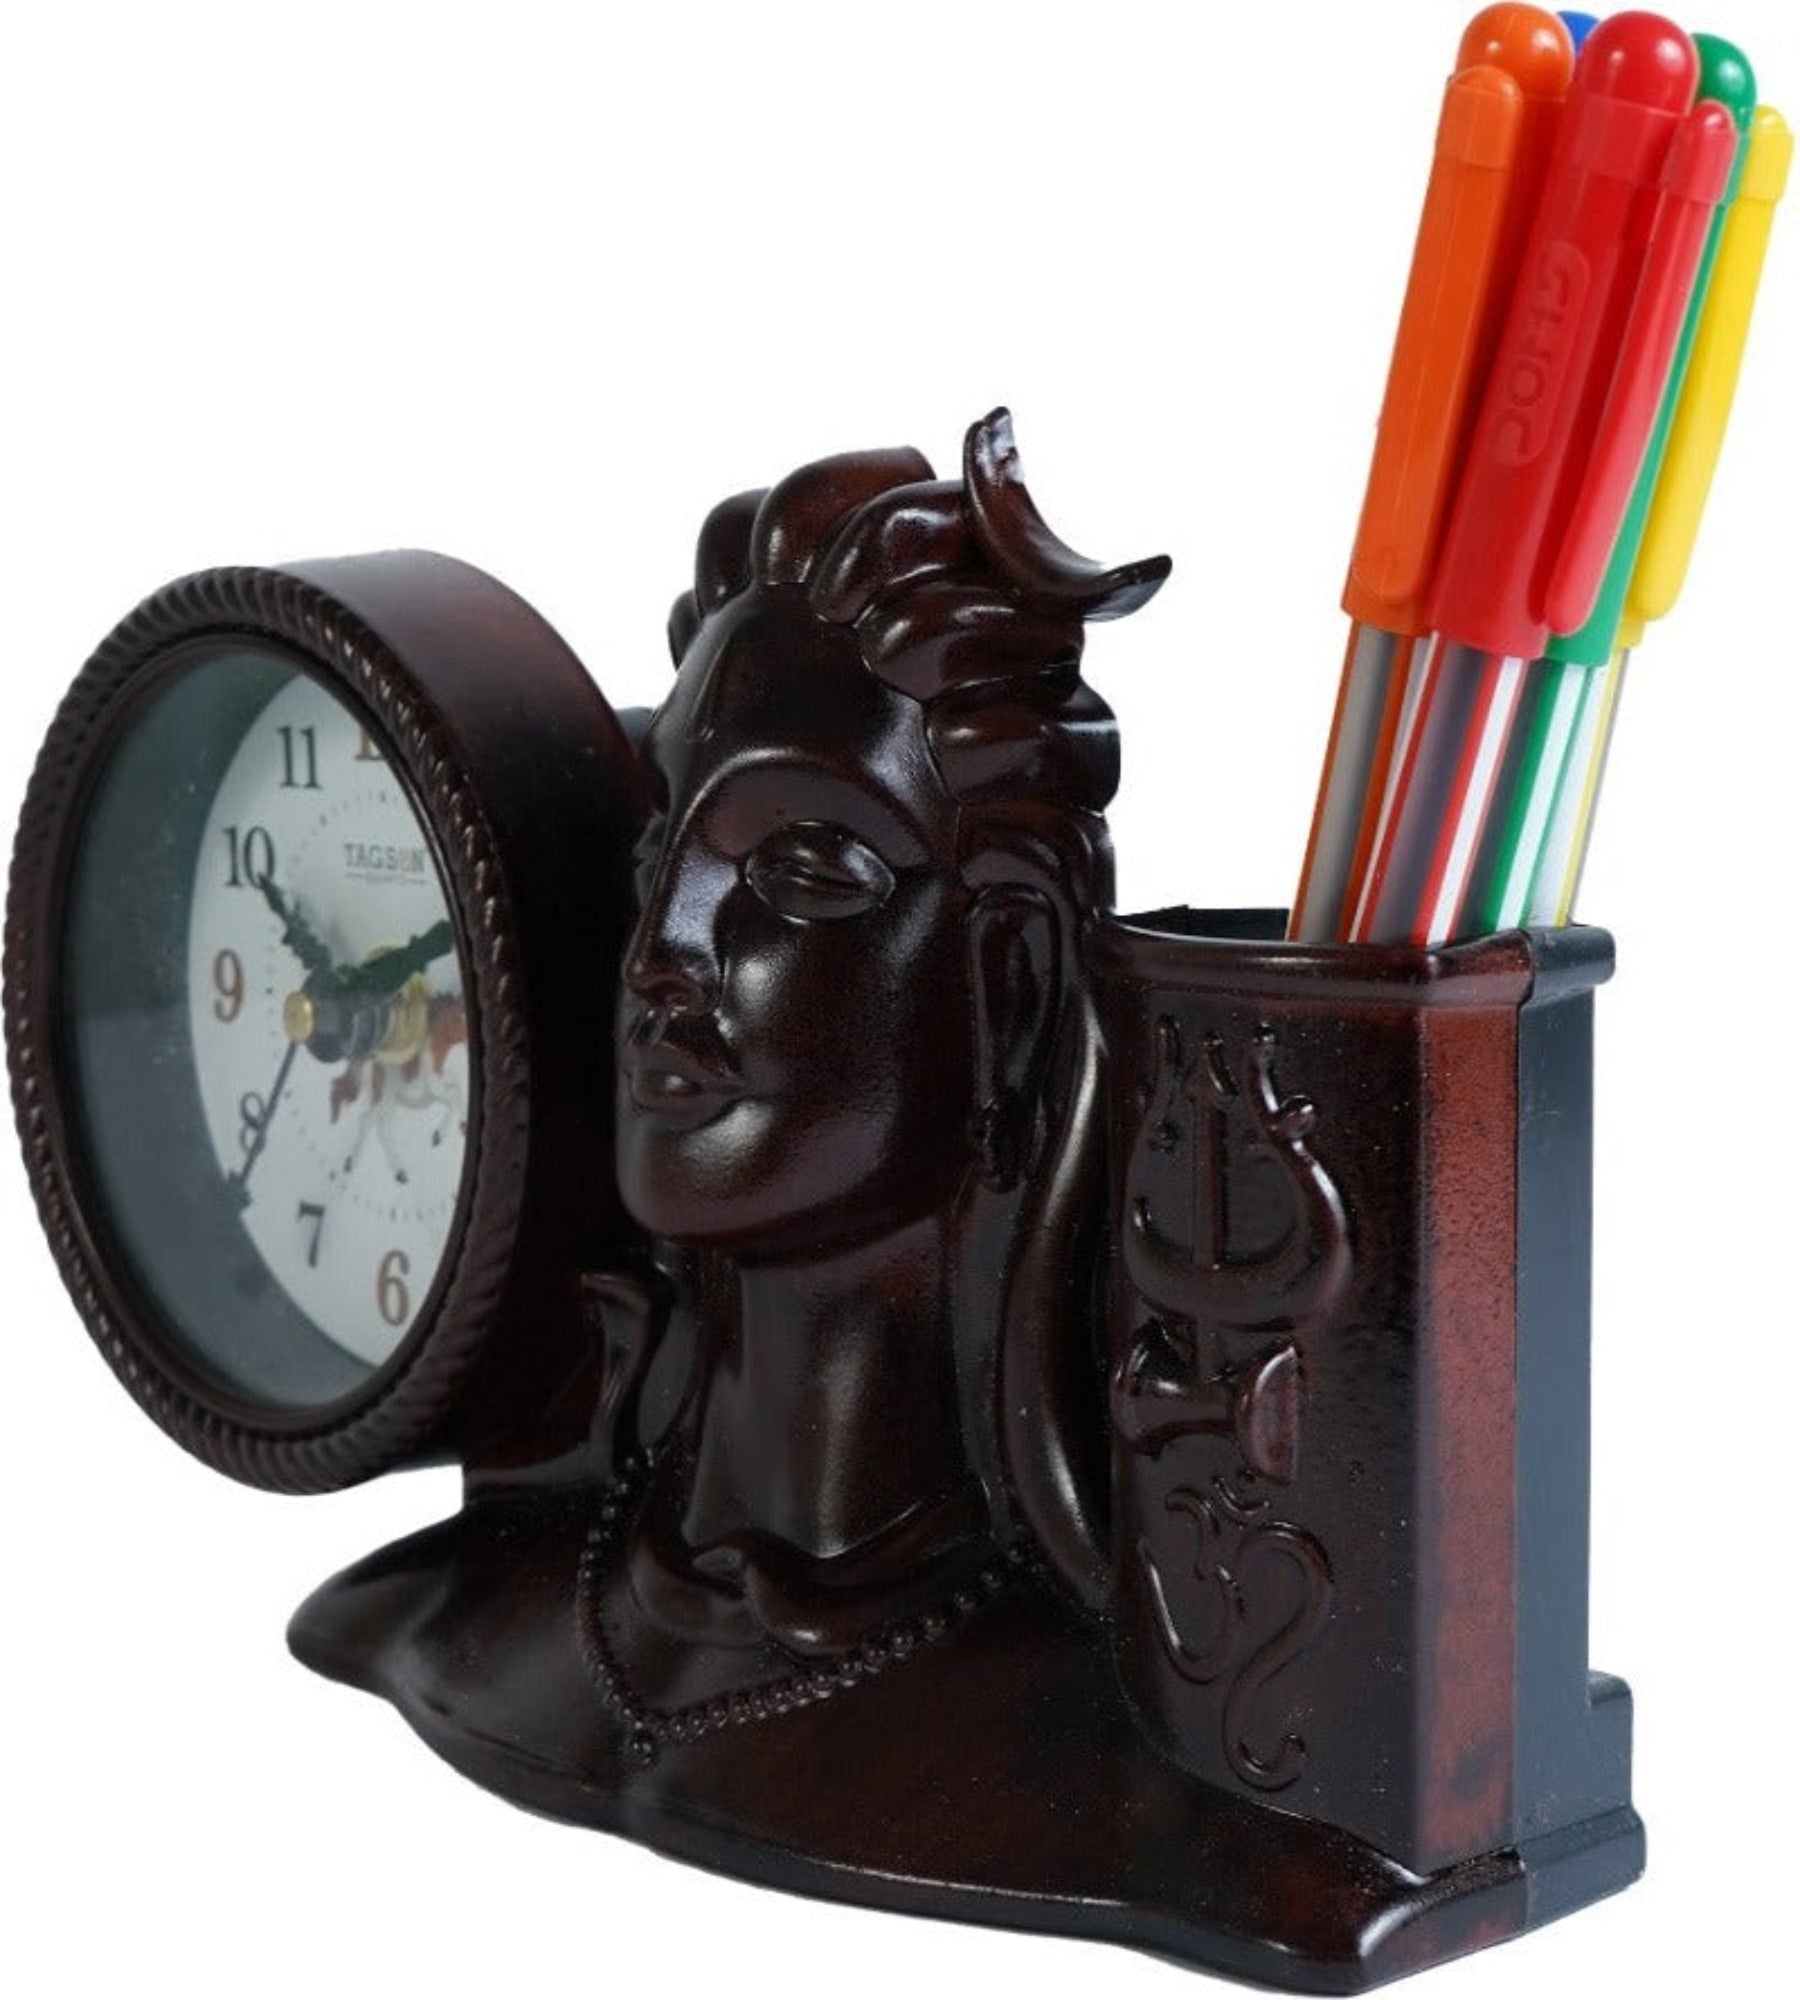 18x11 Cm Adiyogi Table Clock With Penstand For Home Office College K4185